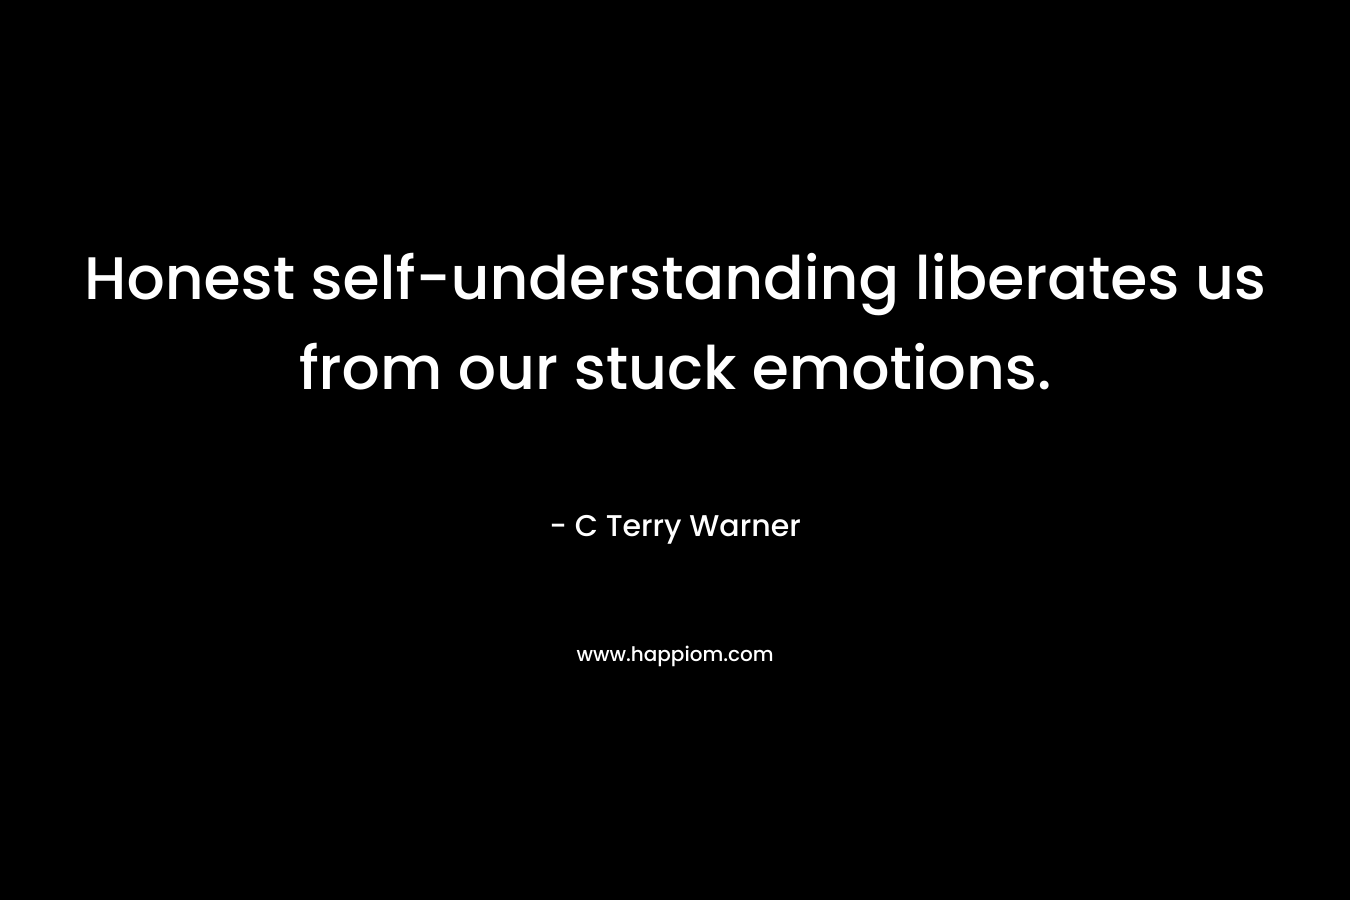 Honest self-understanding liberates us from our stuck emotions. – C Terry Warner